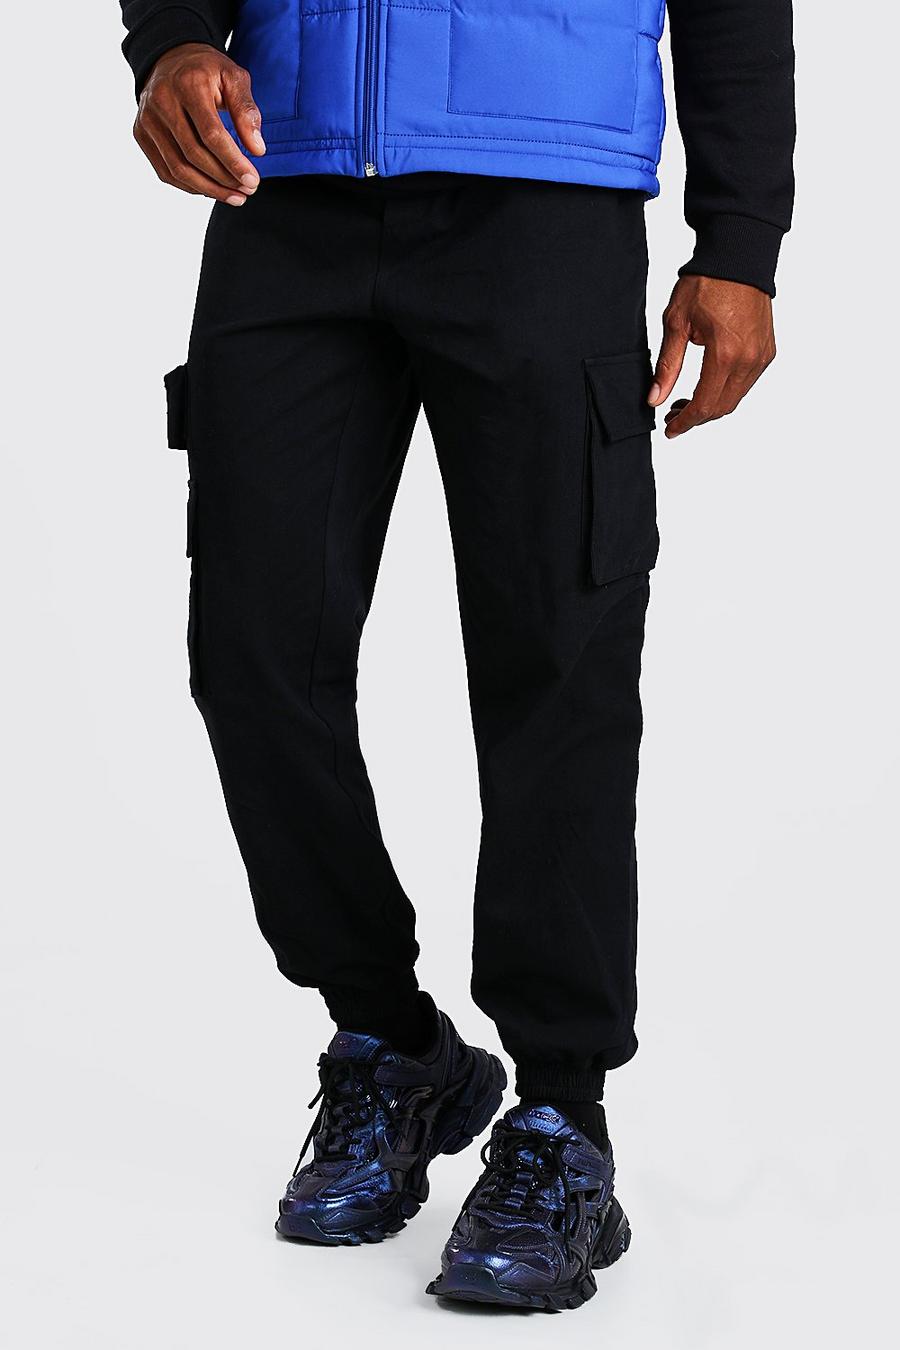 Black Twill Cargo Pants With Contrast Belt Detail image number 1